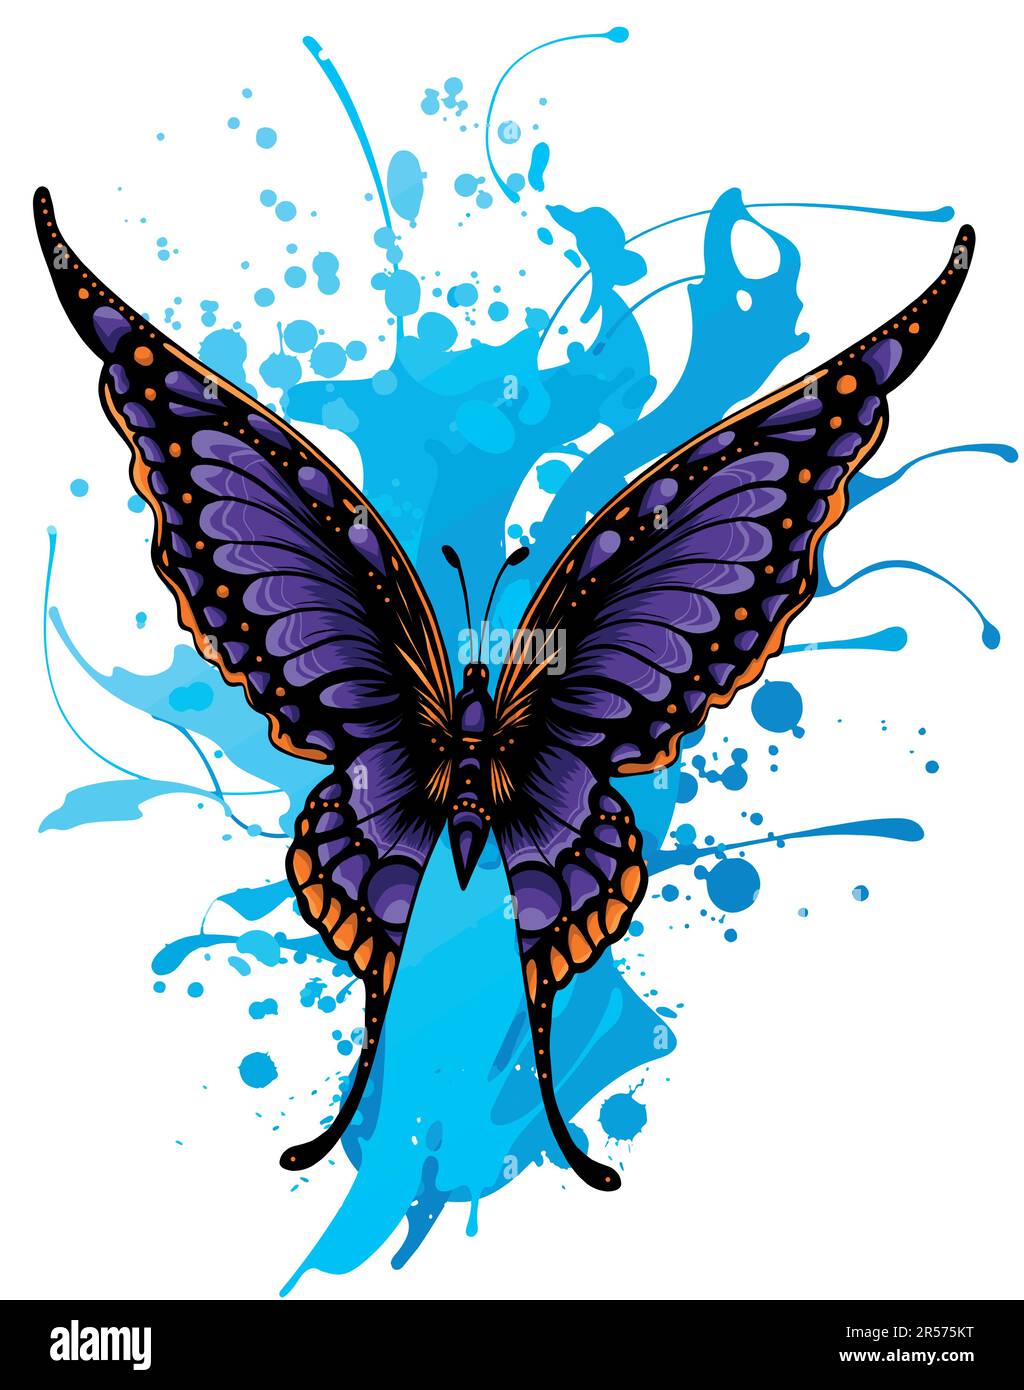 vector illustration of colored butterfly Stock Vector